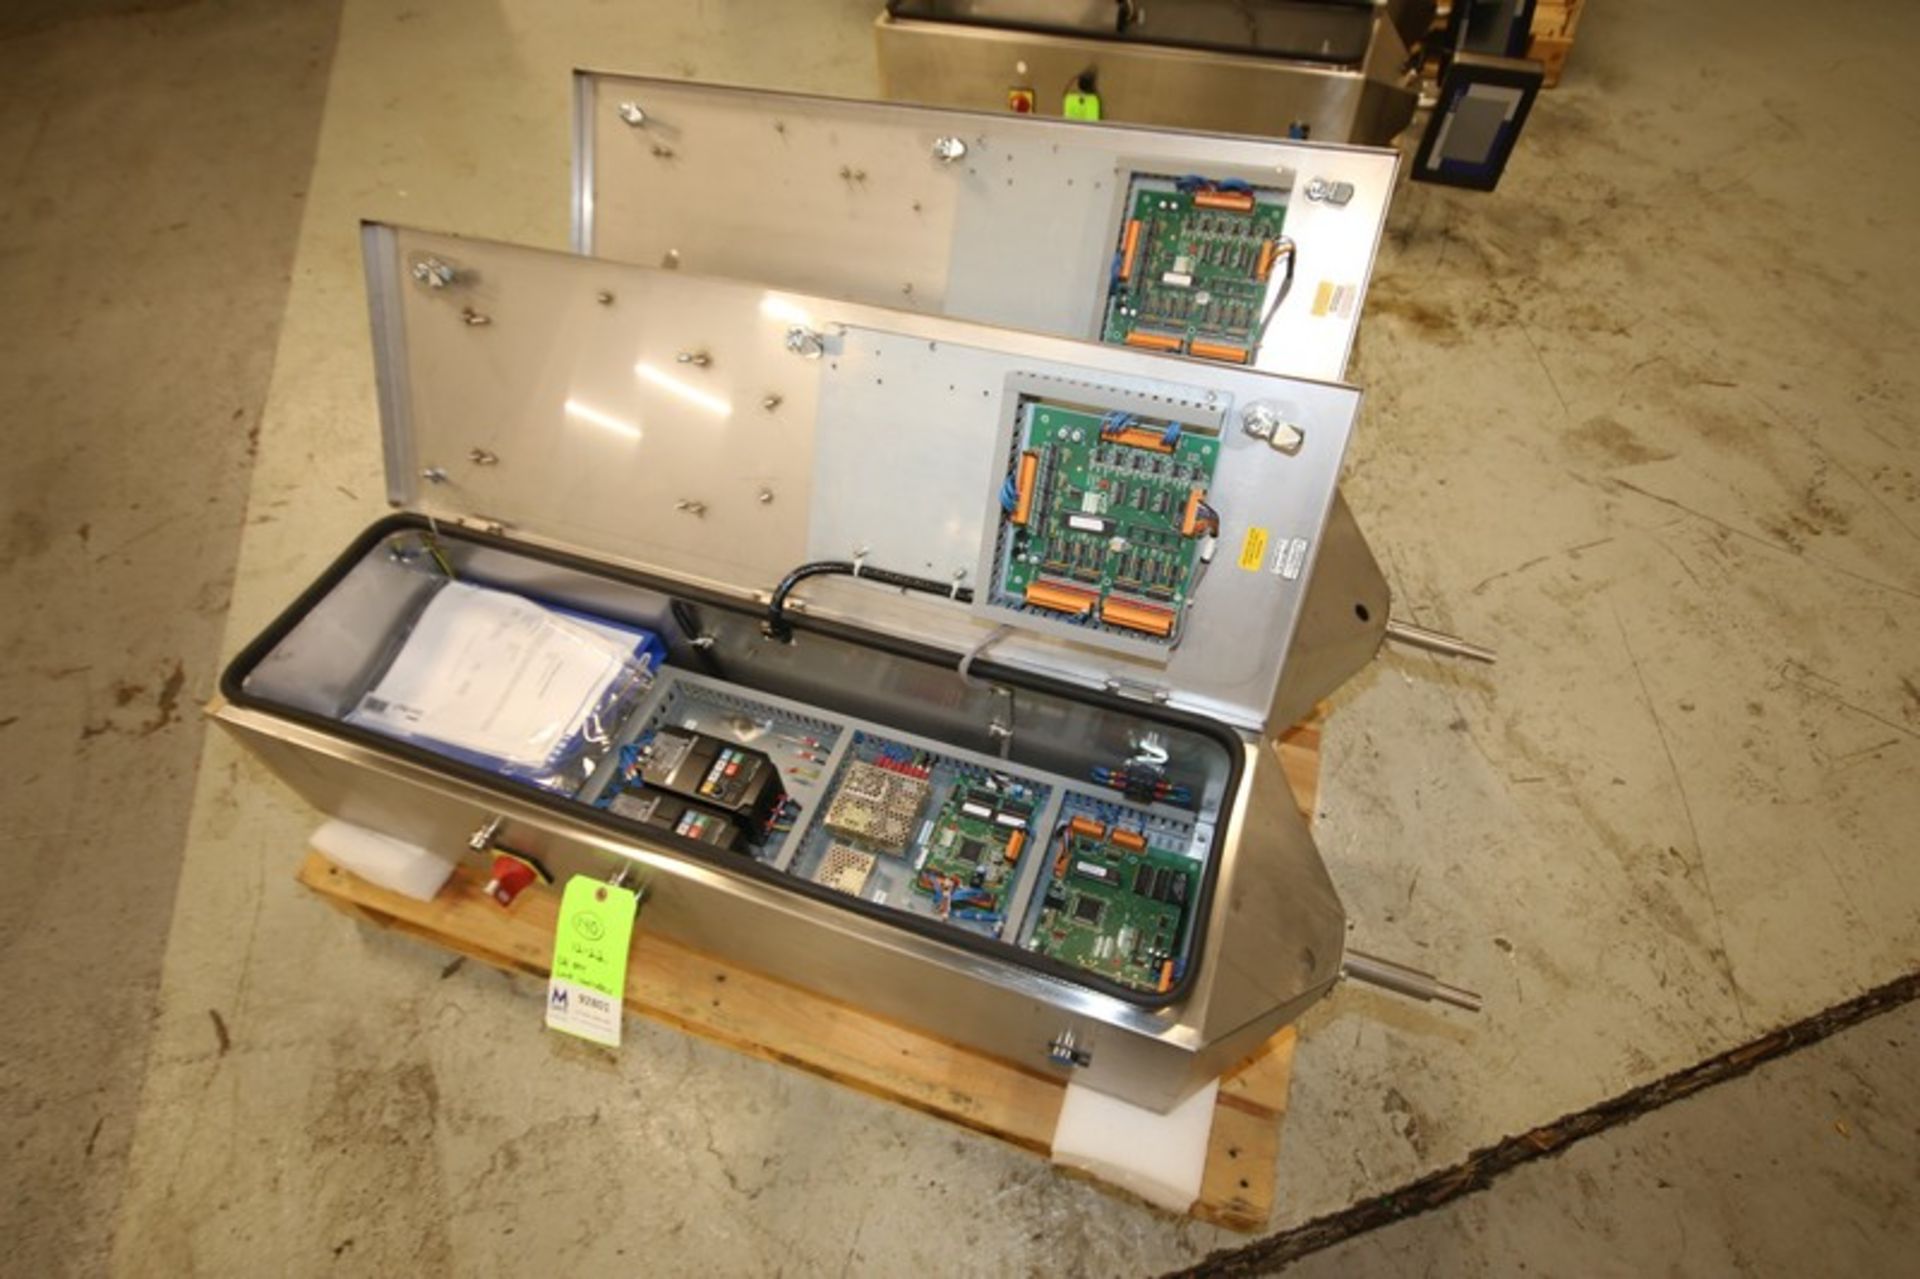 Lot of (2) New Lock Weighchek CK Range Checkweigher Control Panels, Make - CK30, (Note: Does Not